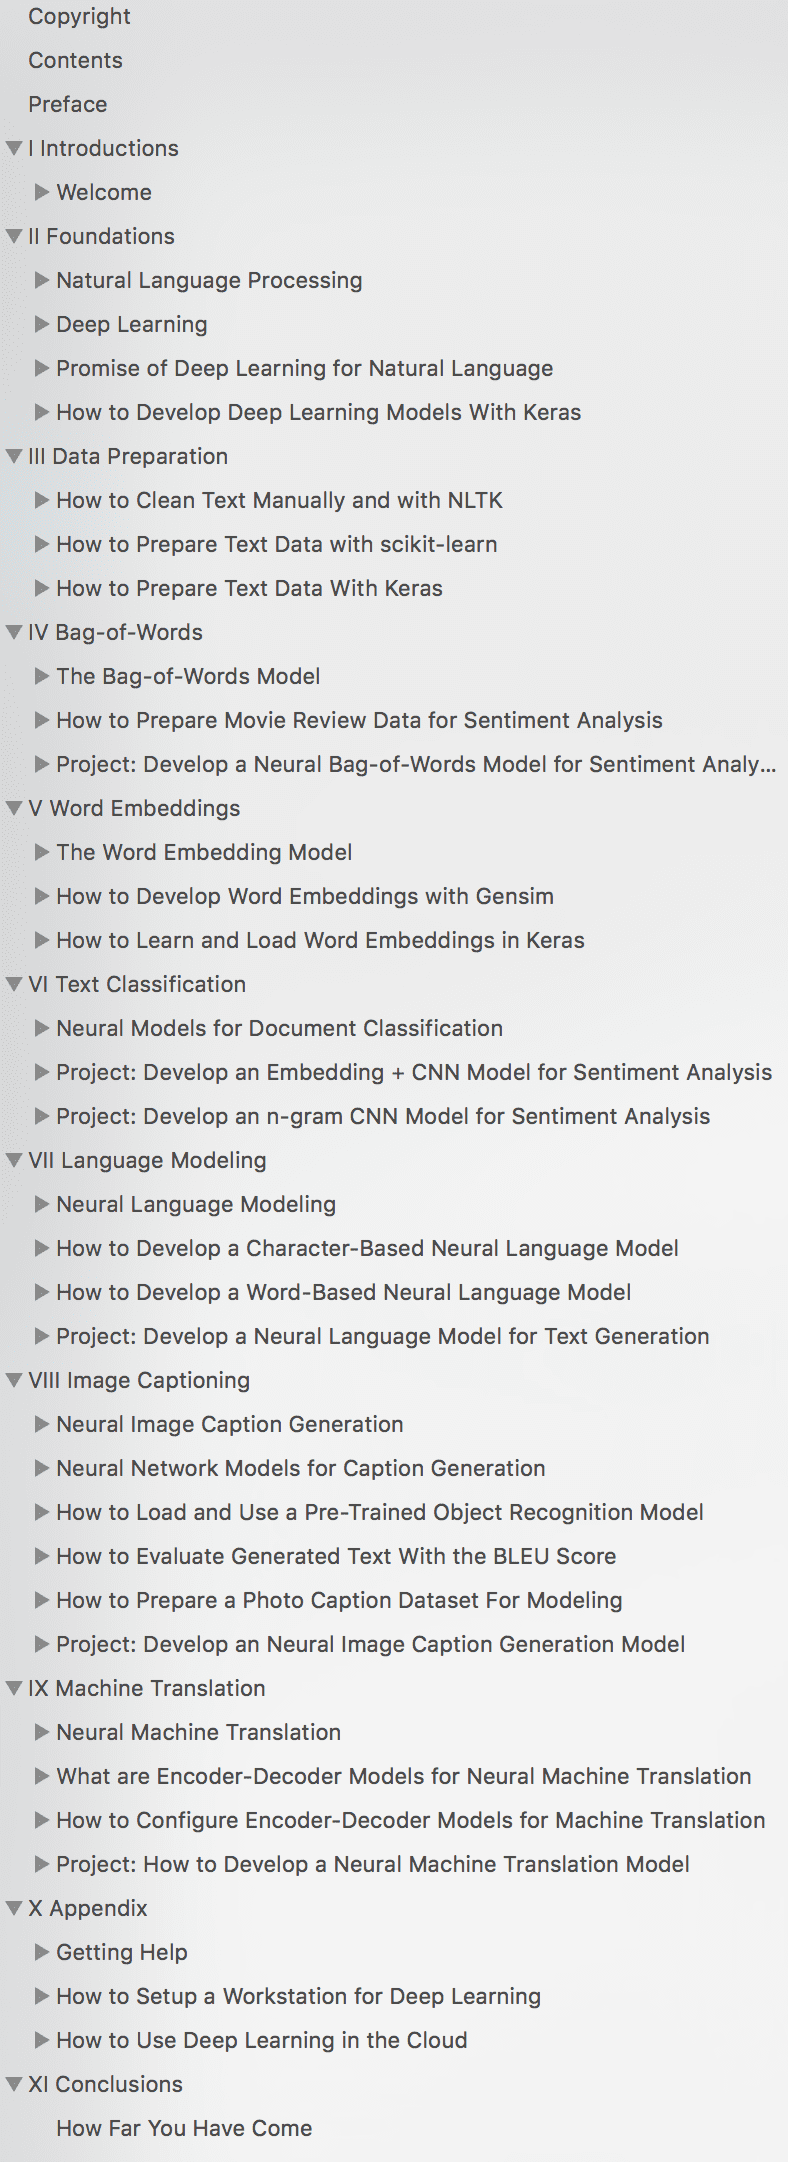 Table of Contents for "Deep Learning for Natural Language Processing".